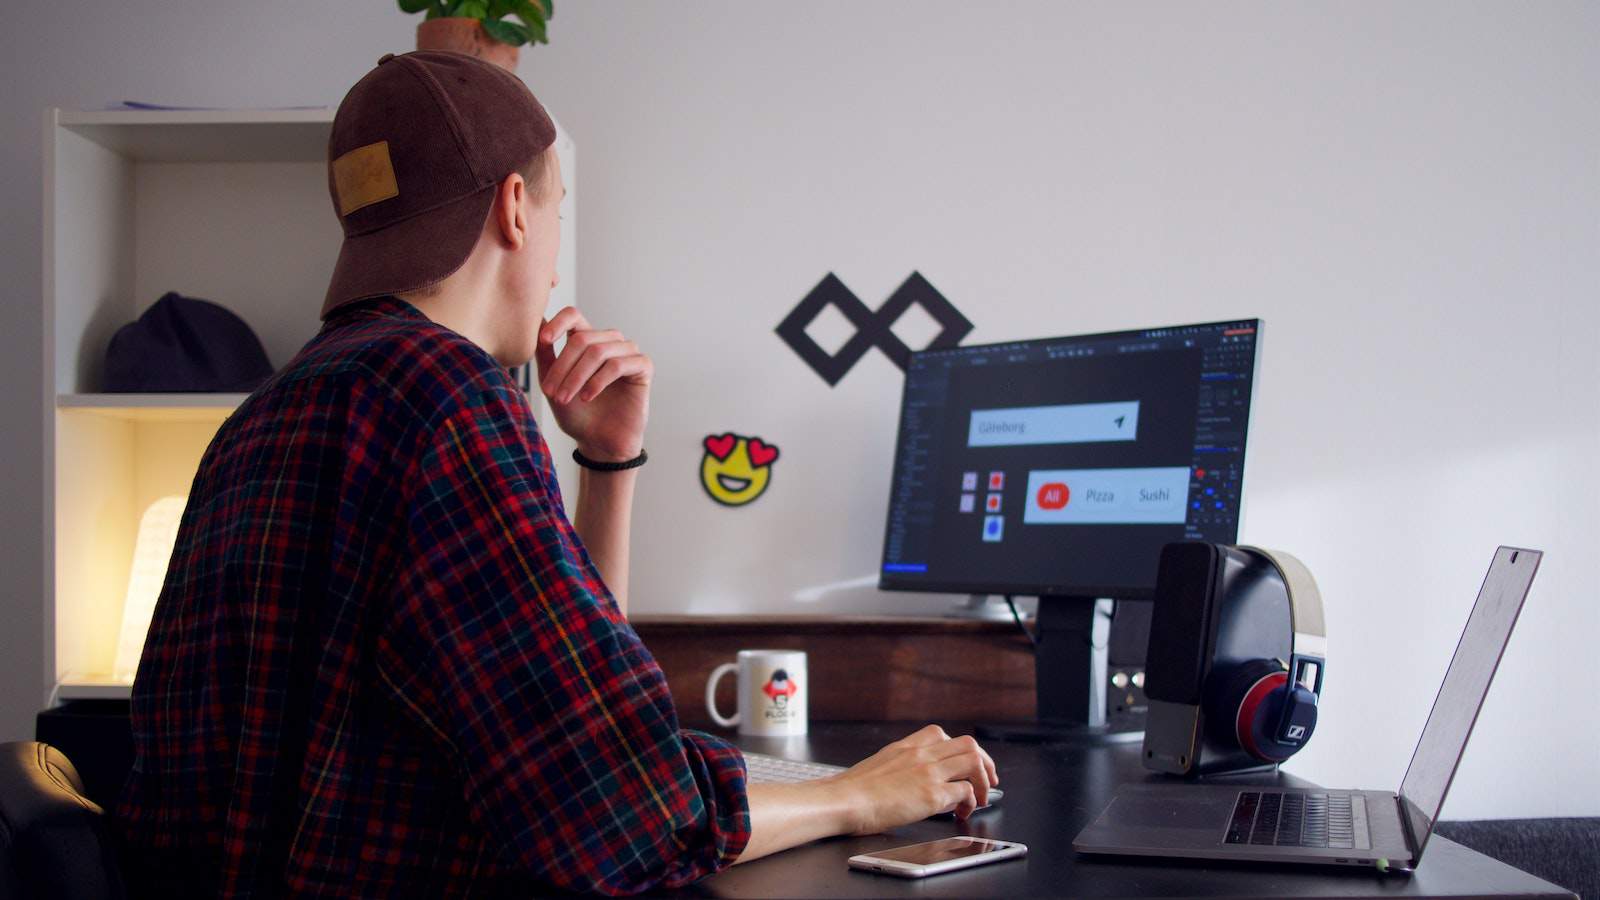 Master graphic design with this Adobe Creative Cloud training for less than $40